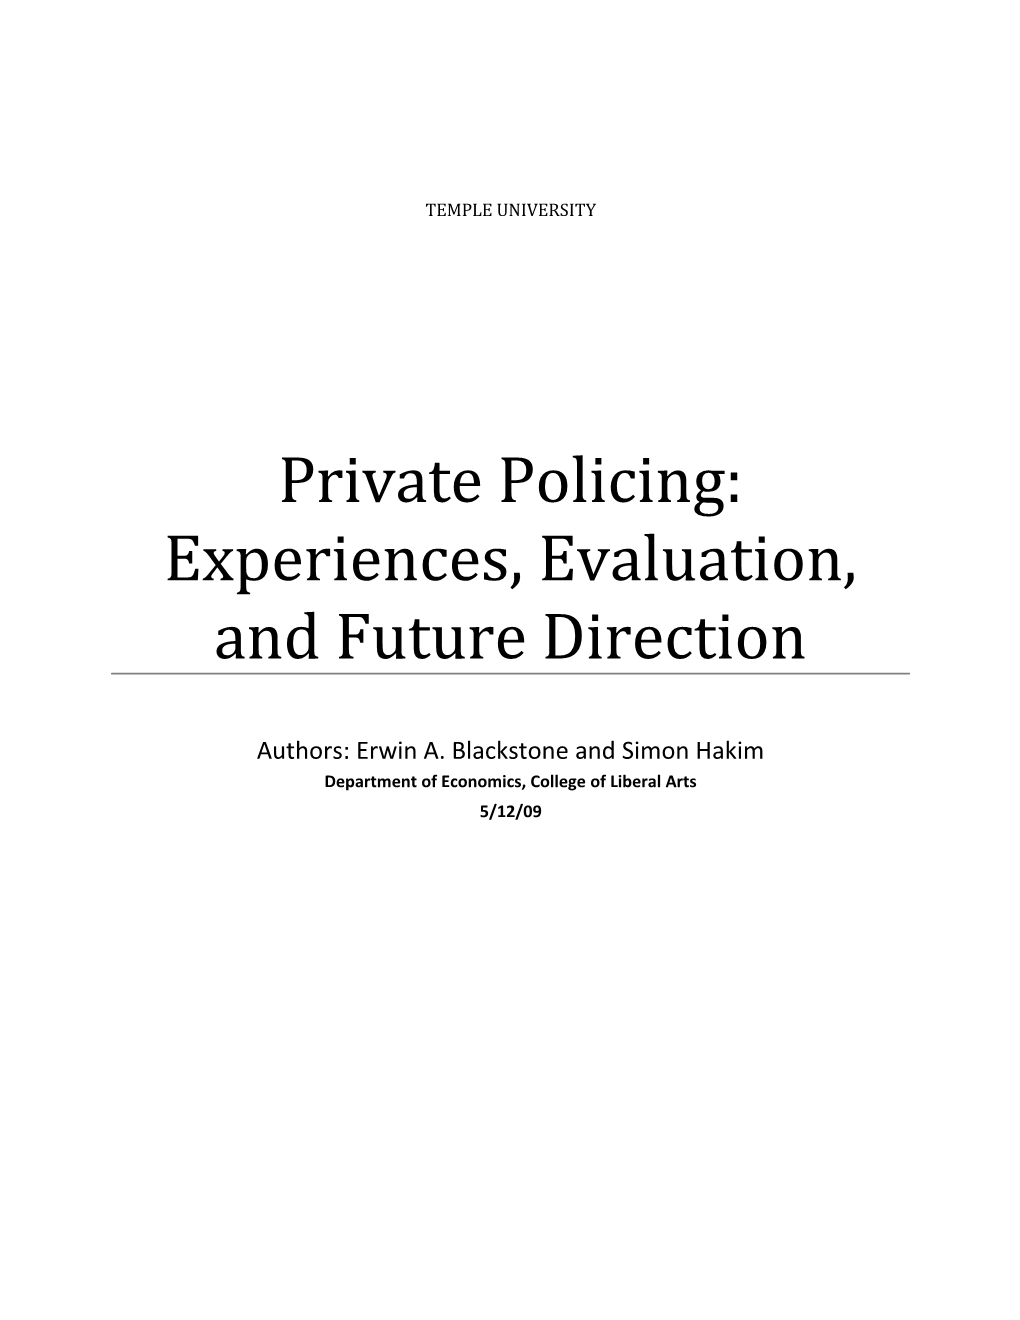 Private Policing: Experiences, Evaluation, and Future Direction